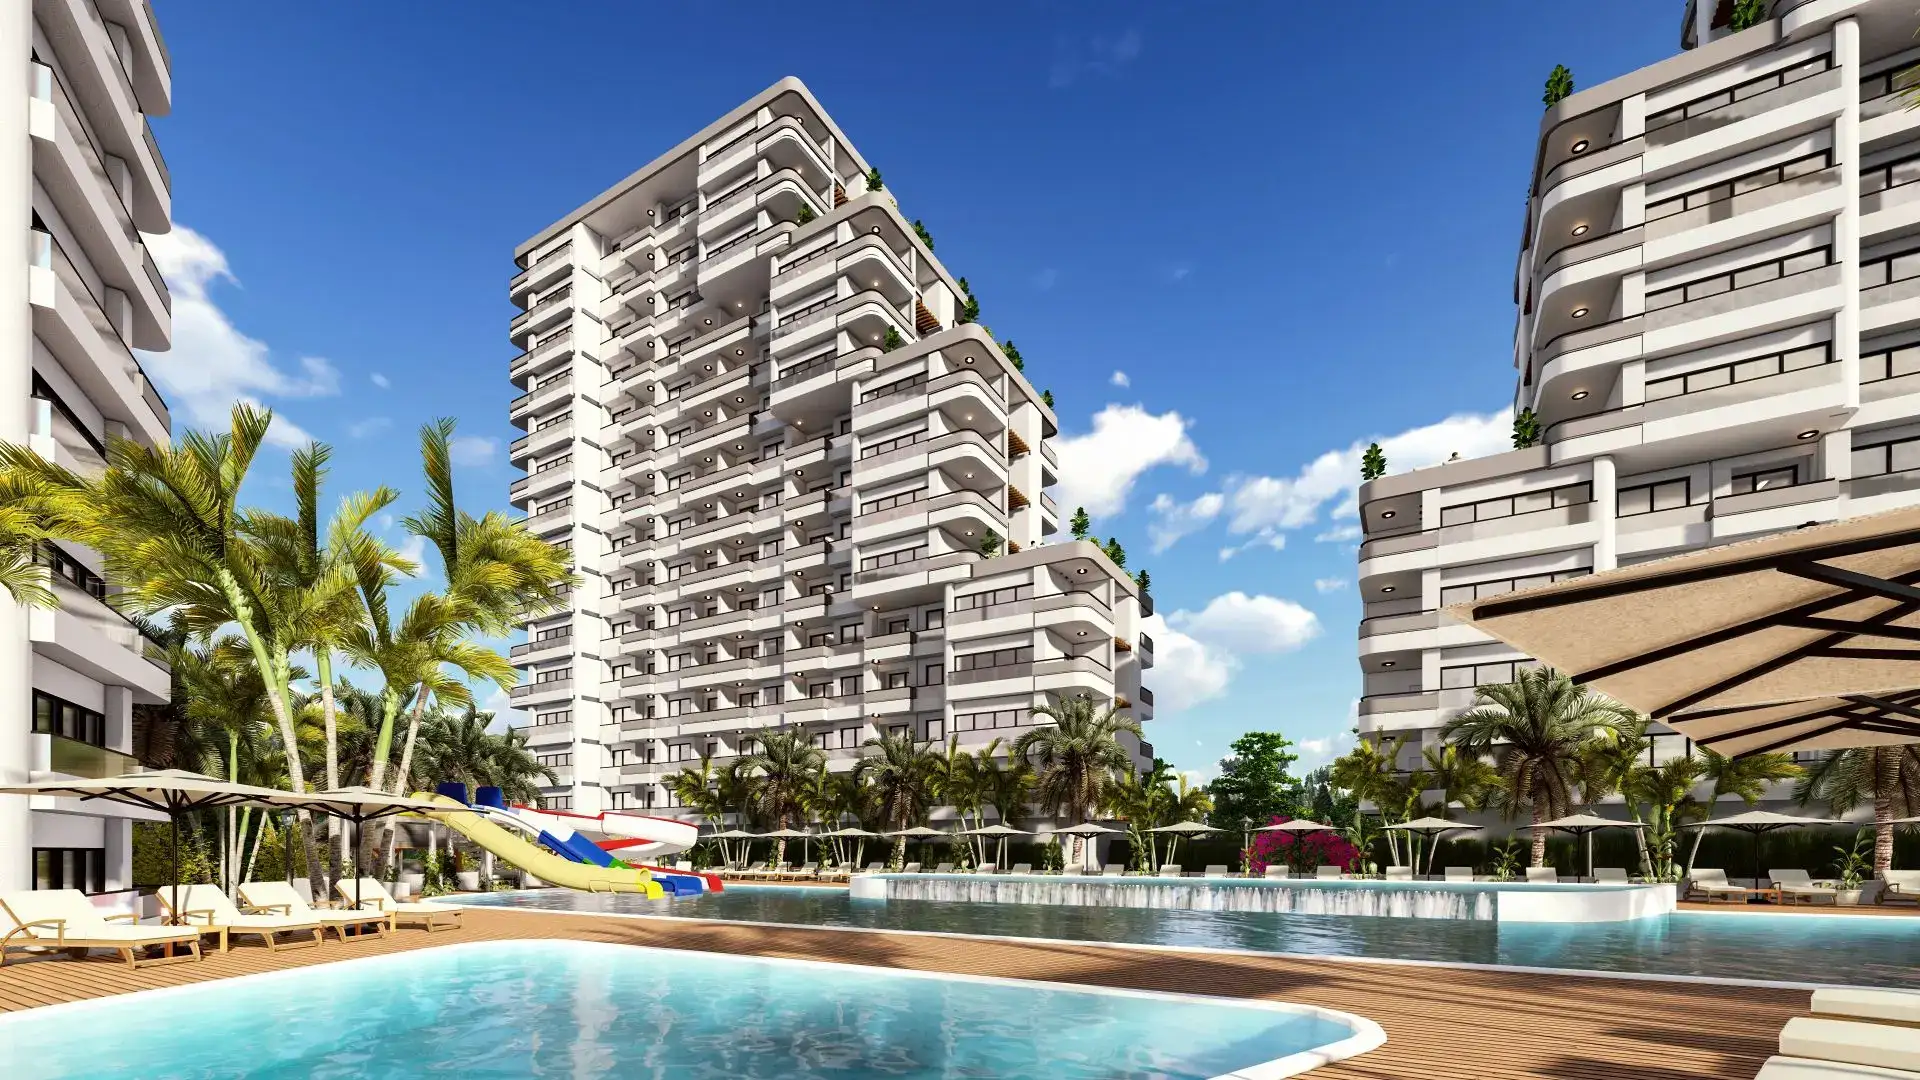 NEW RESIDENTIAL COMPLEX PROJECT LOCATED IN MERSIN 800M FROM THE SEA